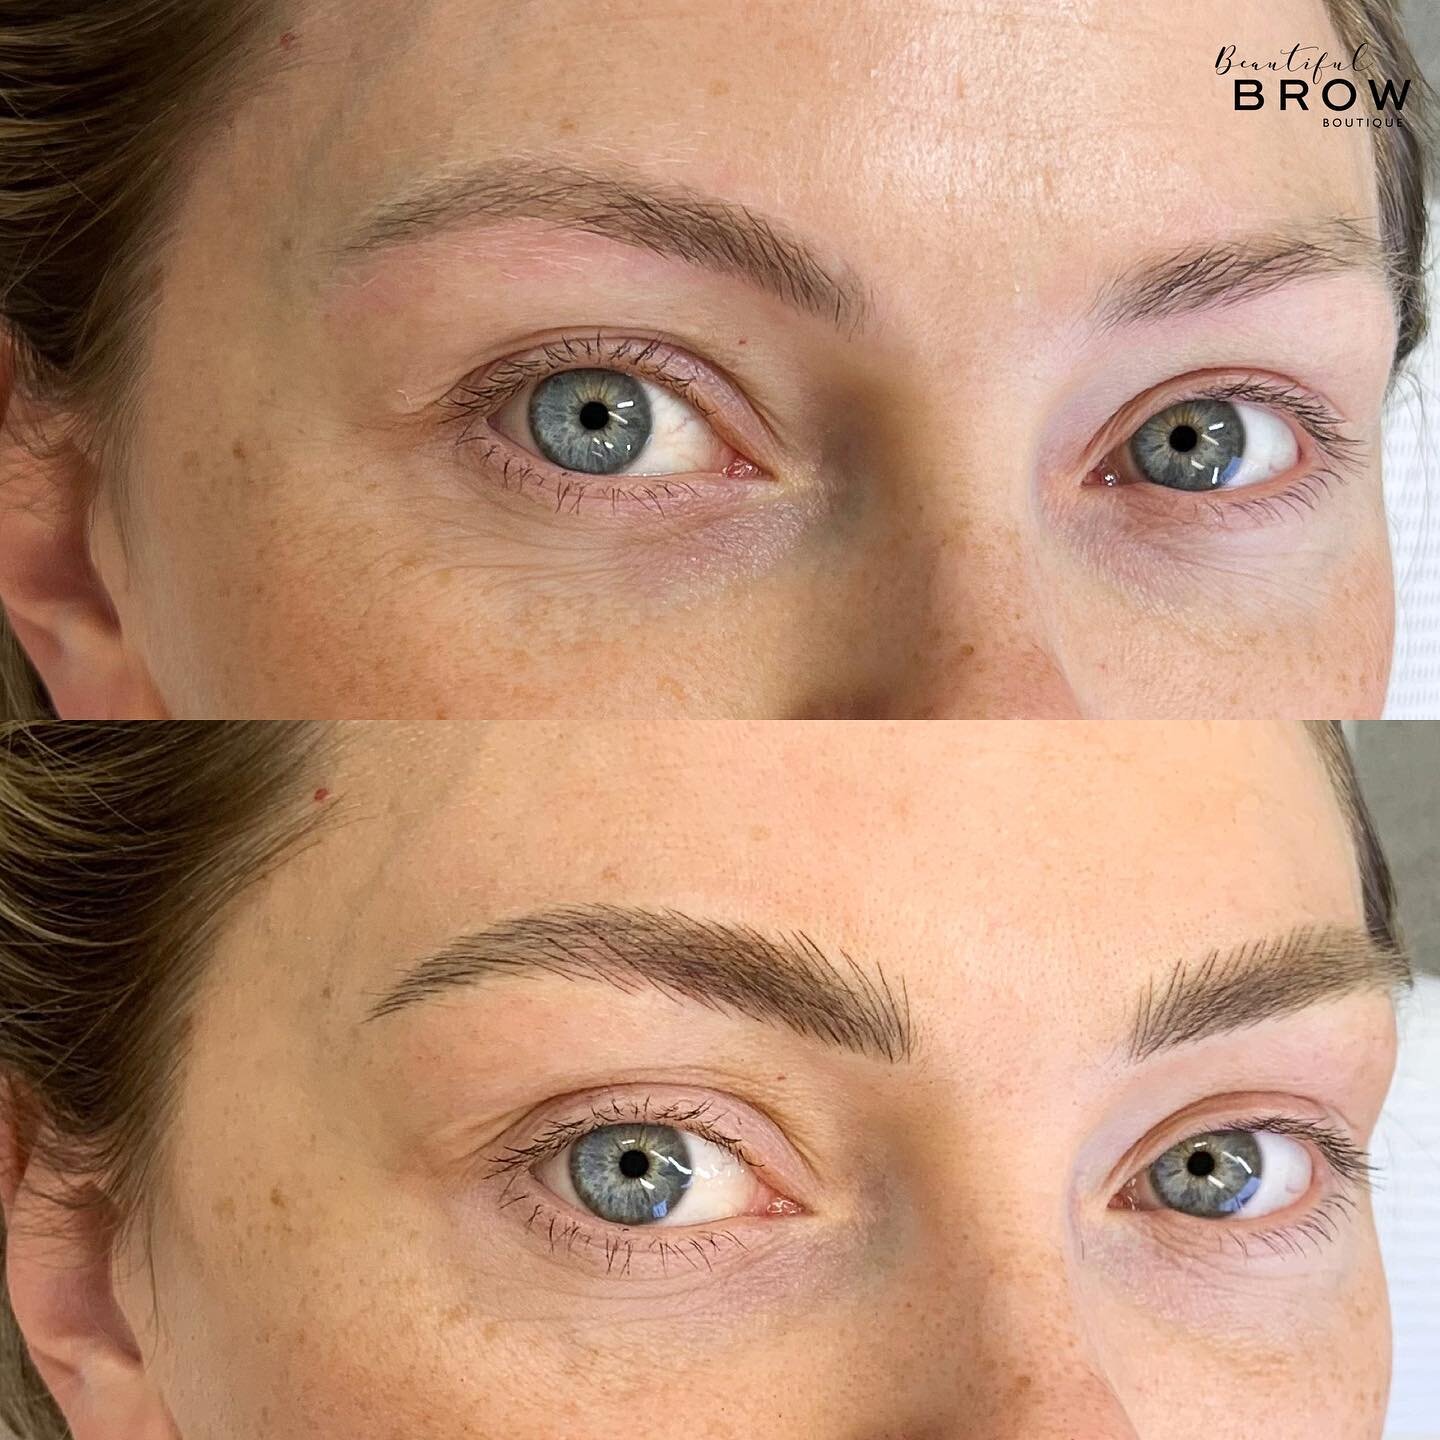 Trust in the process.. gals it&rsquo;s easy to get fixated on the initial appearance of your brand new fresh brow babies but trust me when I say this . Your brows will soften, shrink and look less severe once they heal which will take 4 weeks . 

You